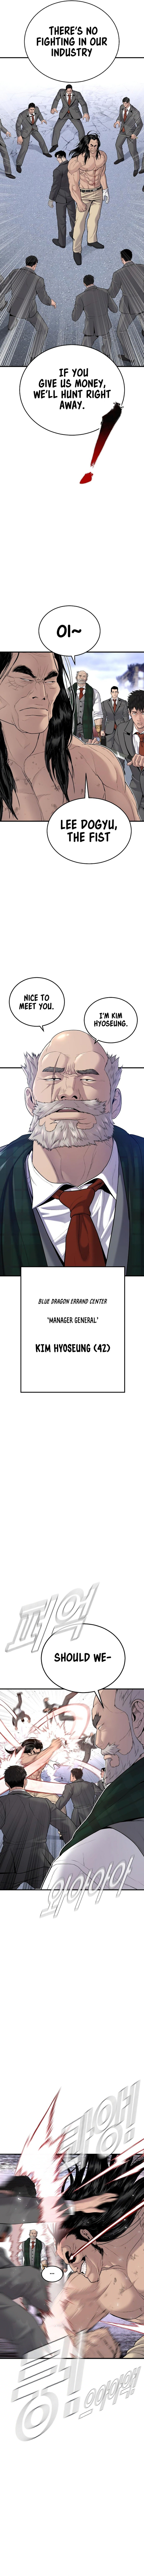 manager-kim-chap-68-1